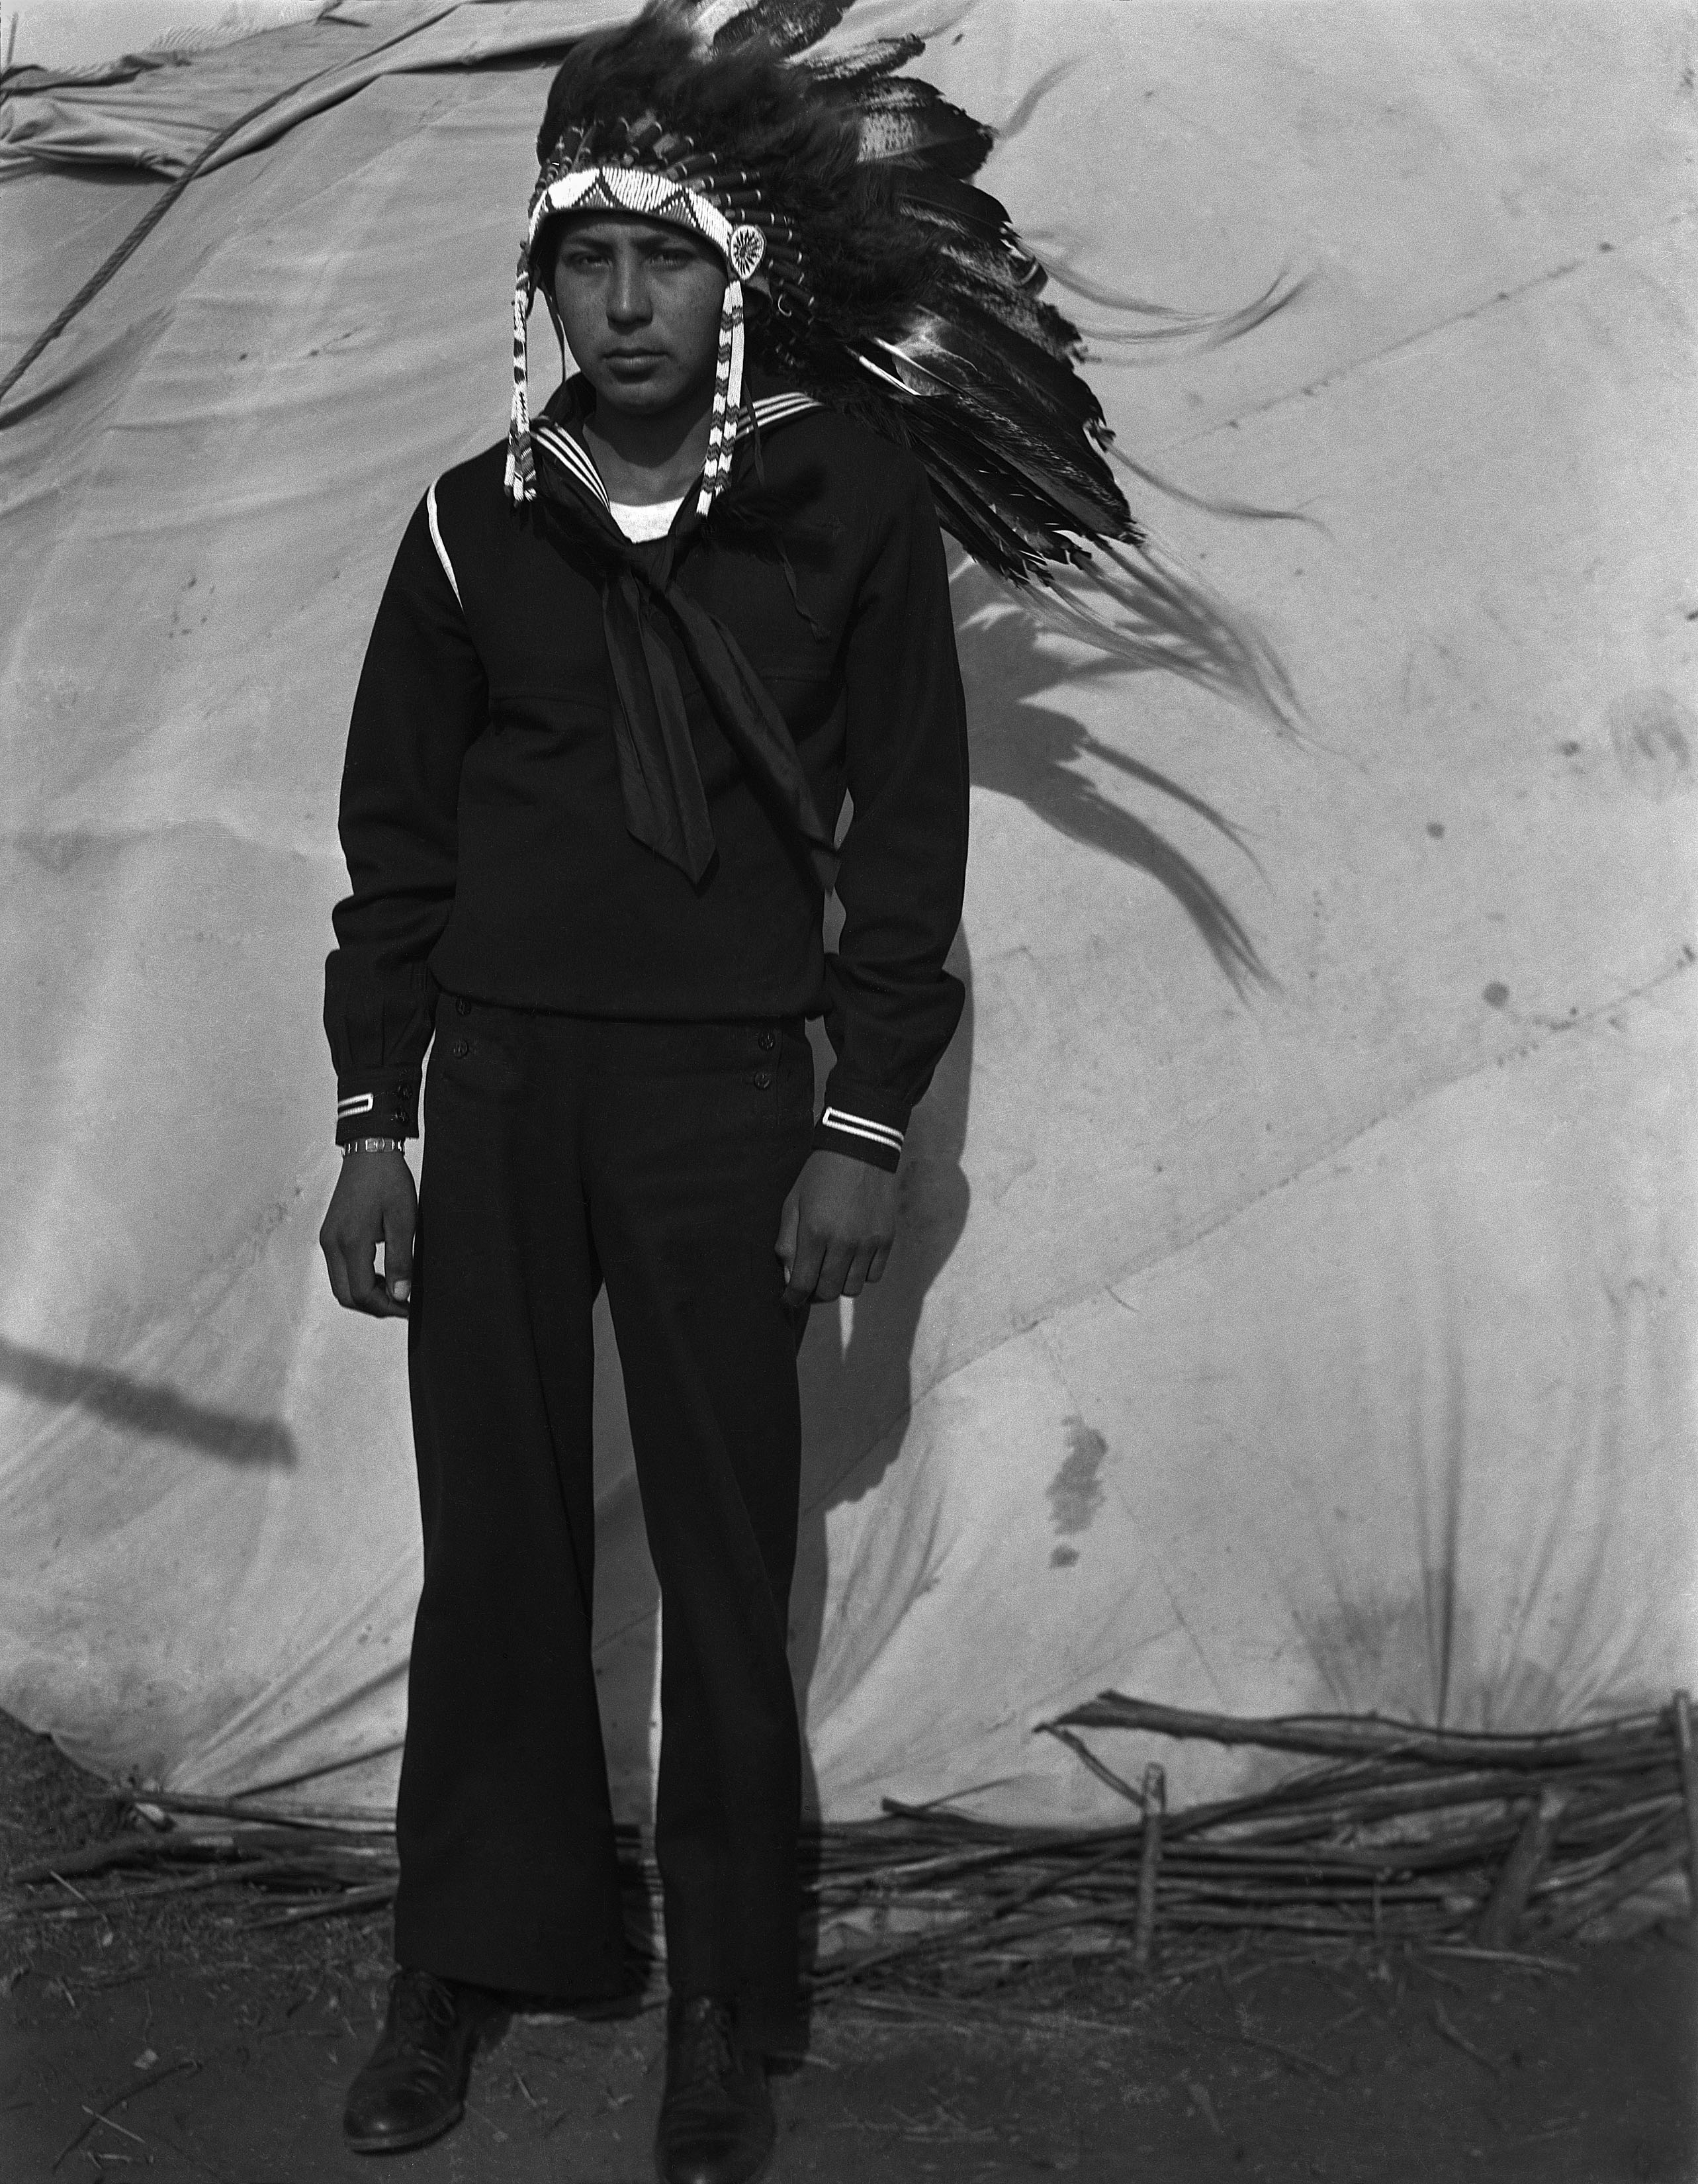 Photography: Jerry Poolaw (Kiowa) on leave from duty in the Navy. Anadarko, Oklahoma, ca. 1944. Courtesy the Estate of Horace Poolaw